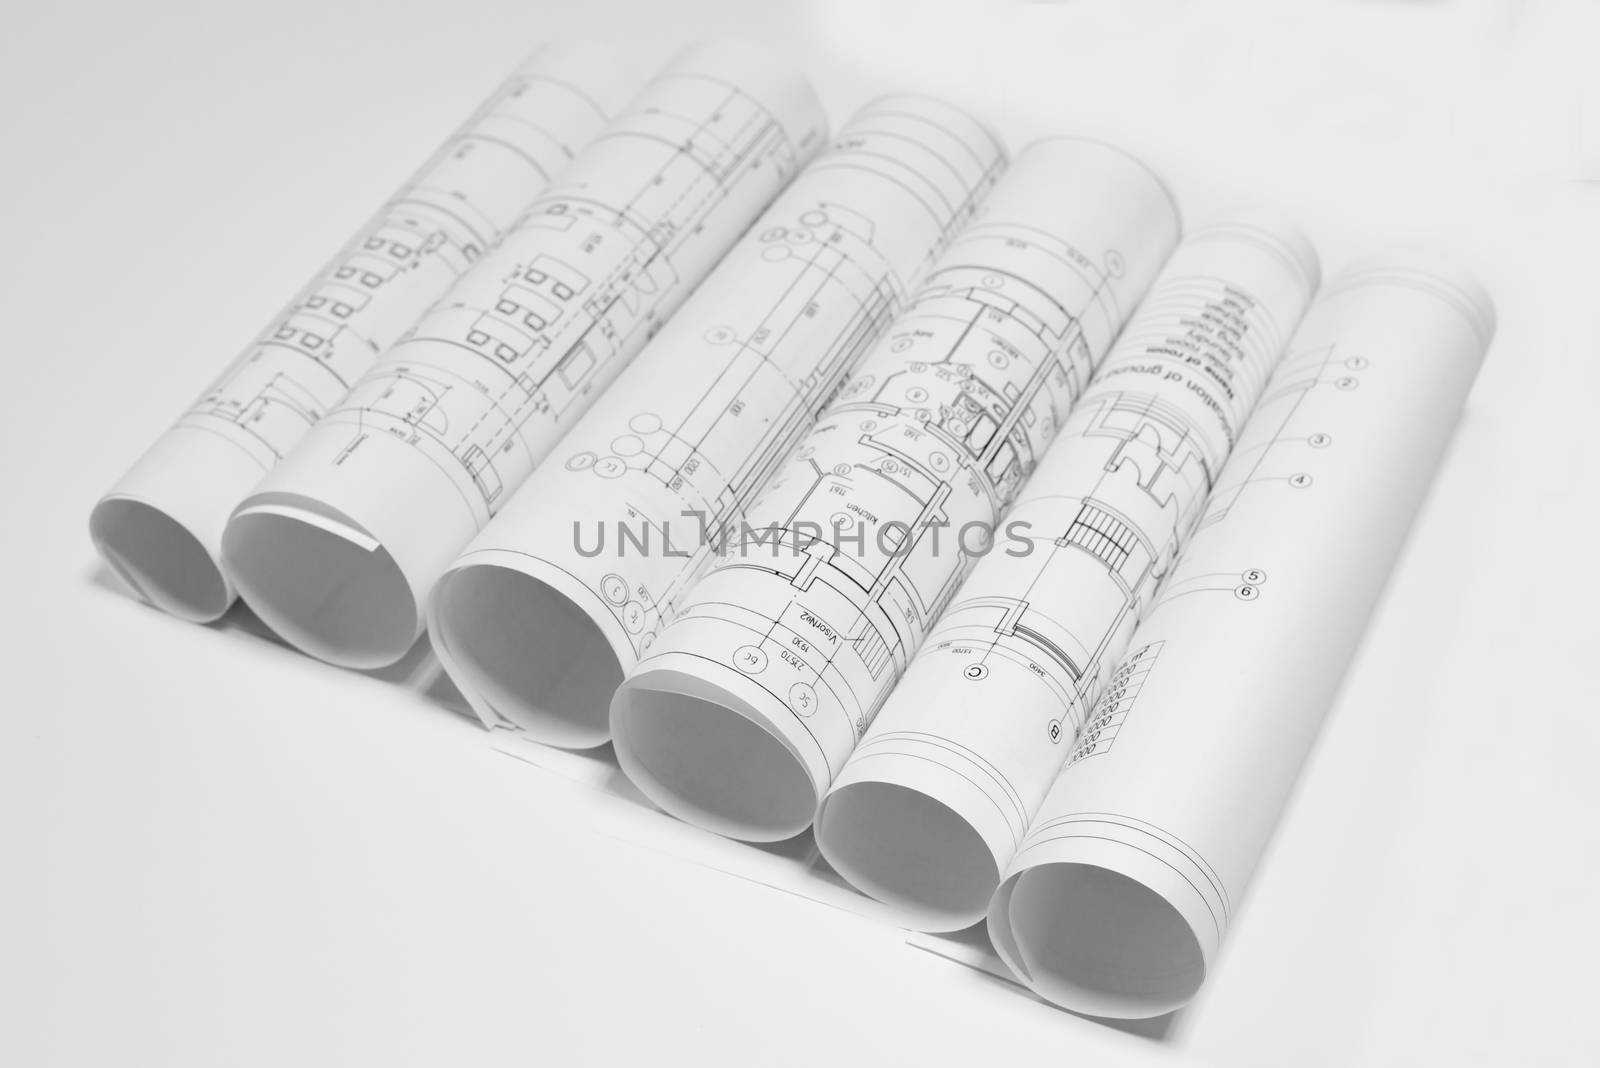 Scrolls architectural drawings on white background by cherezoff